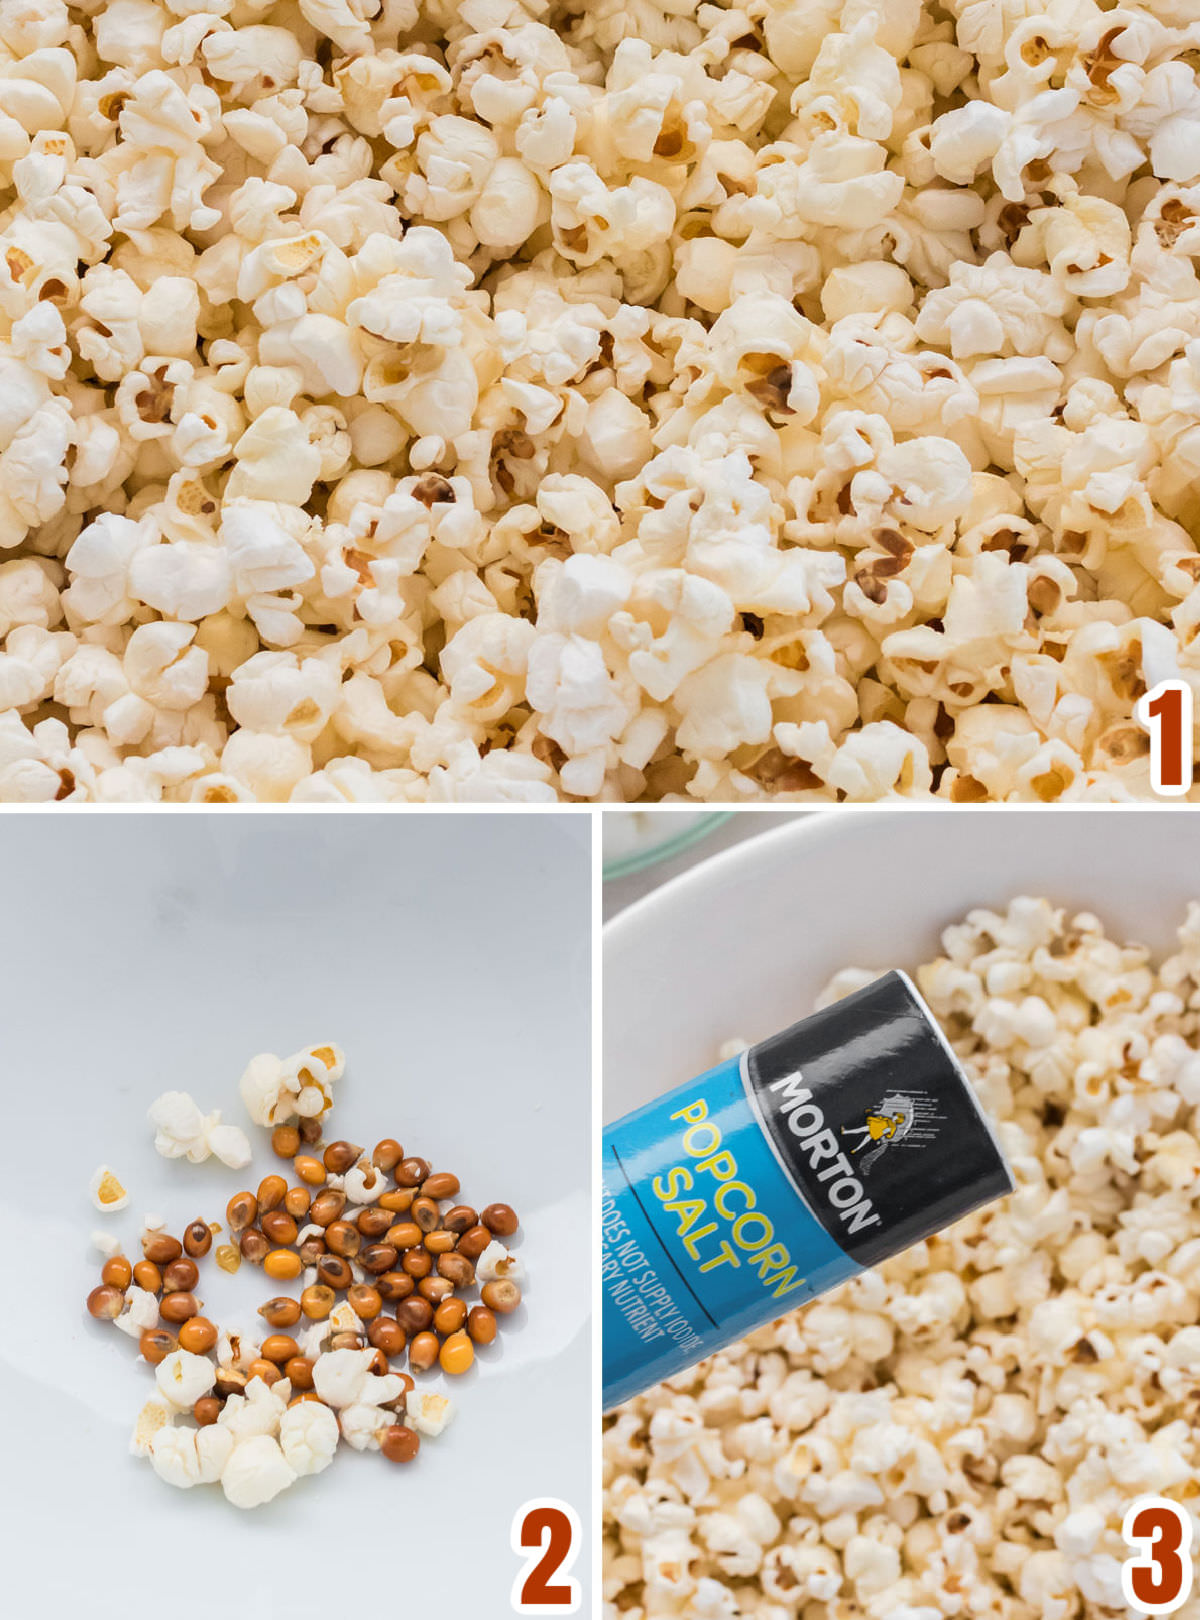 Collage image showing the steps for making the homemade popcorn for the Fall Harvest Popcorn.